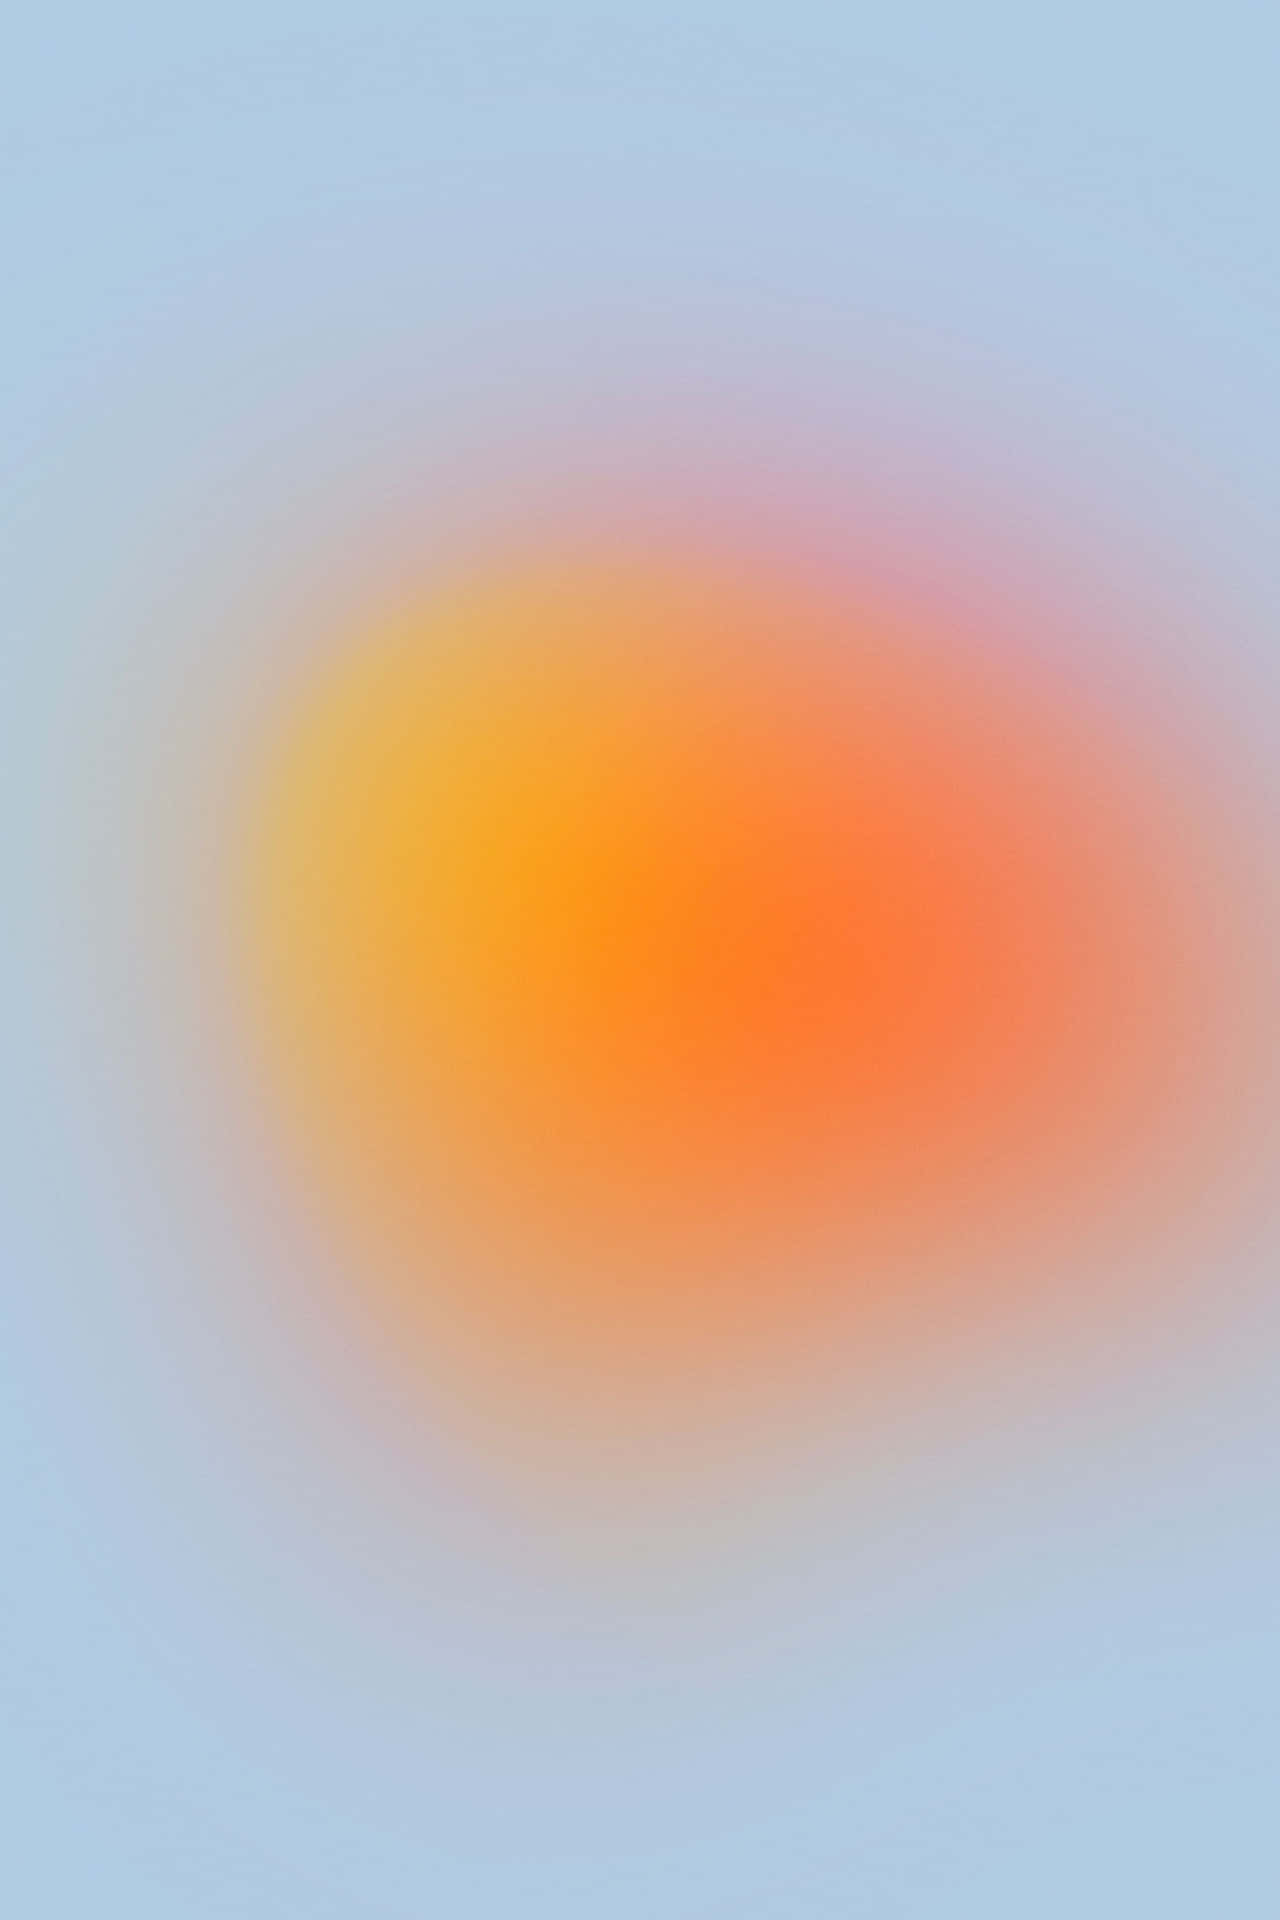 Abstract Sunrise Gradient Background Wallpaper